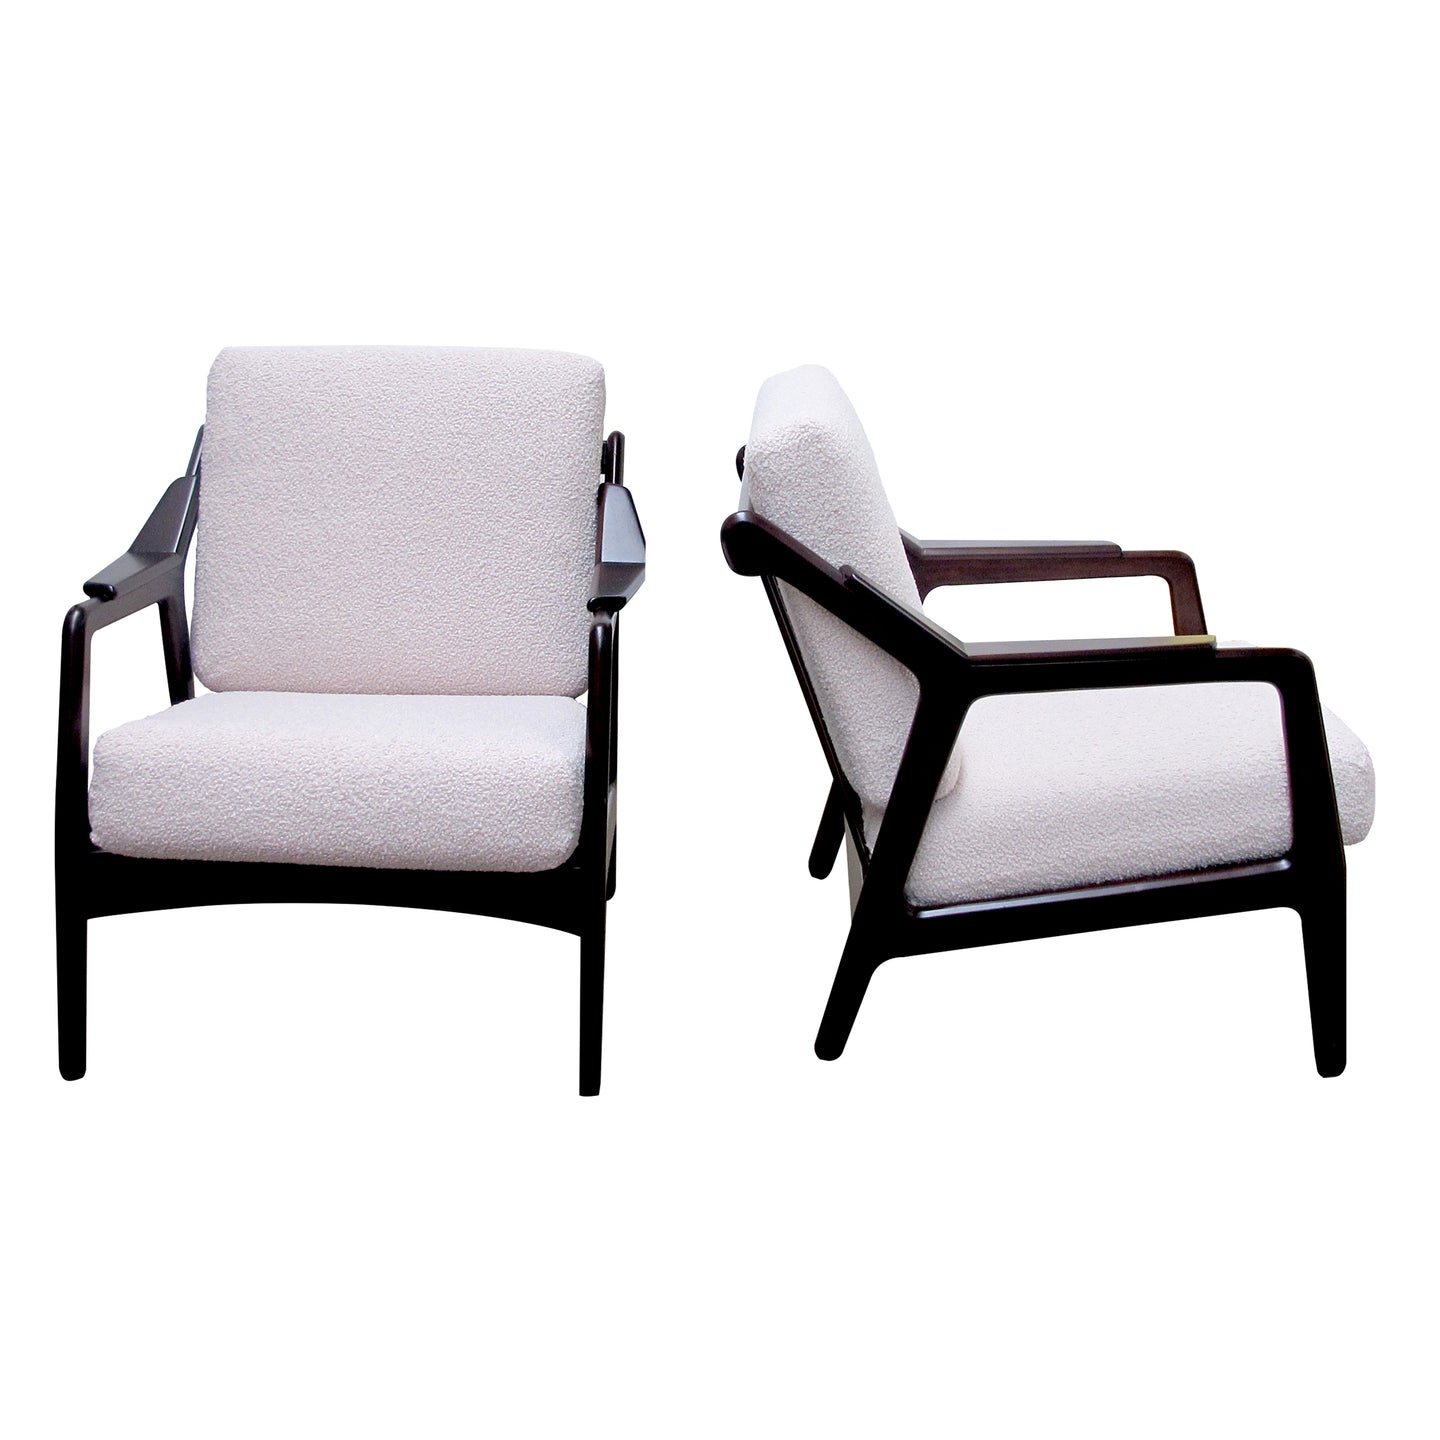 1950s Swedish pair of armchairs newly upholstered